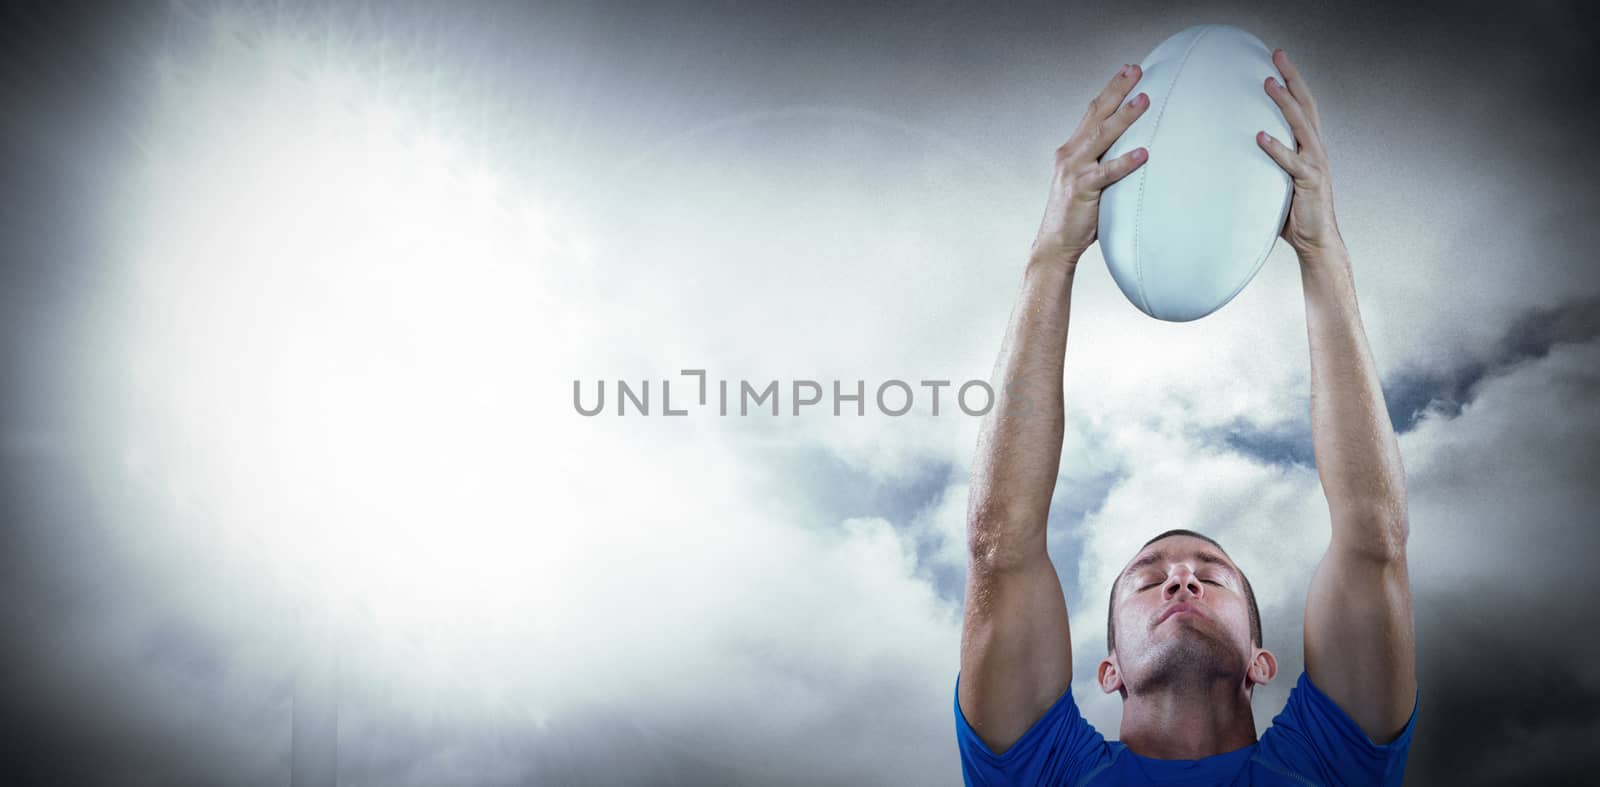 Rugby player holding ball with eyes closed against spotlight in sky